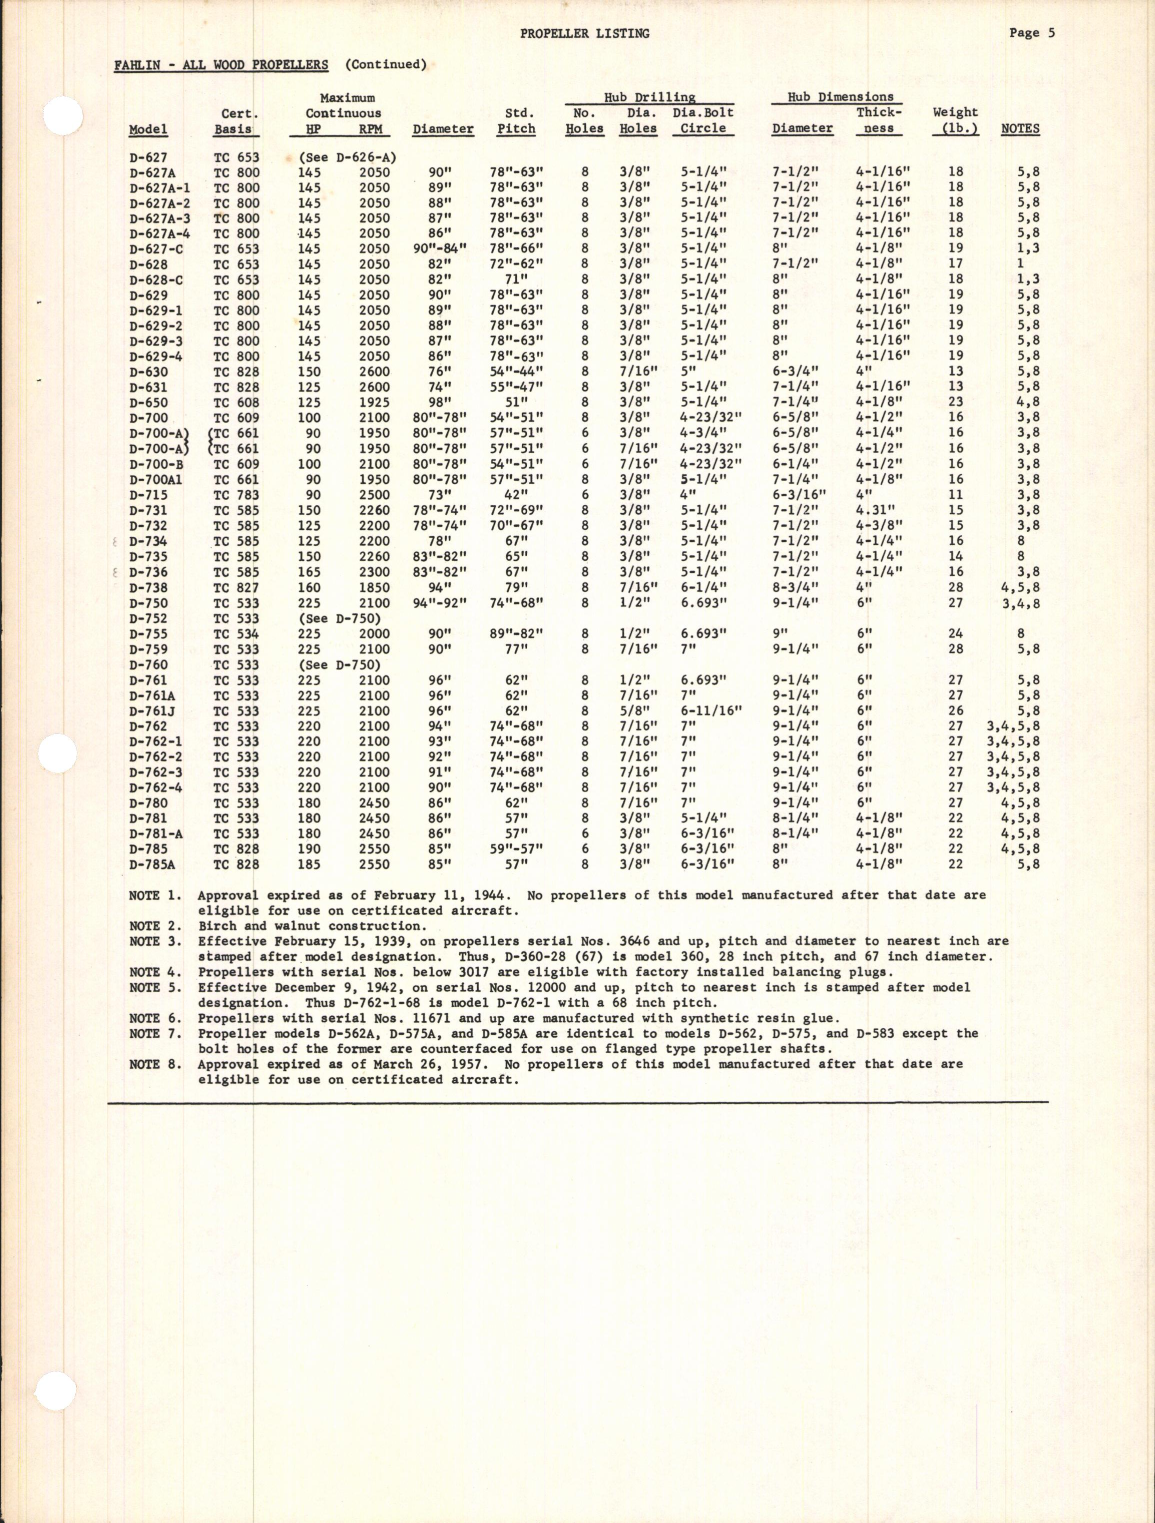 Sample page 7 from AirCorps Library document: Propeller Listing